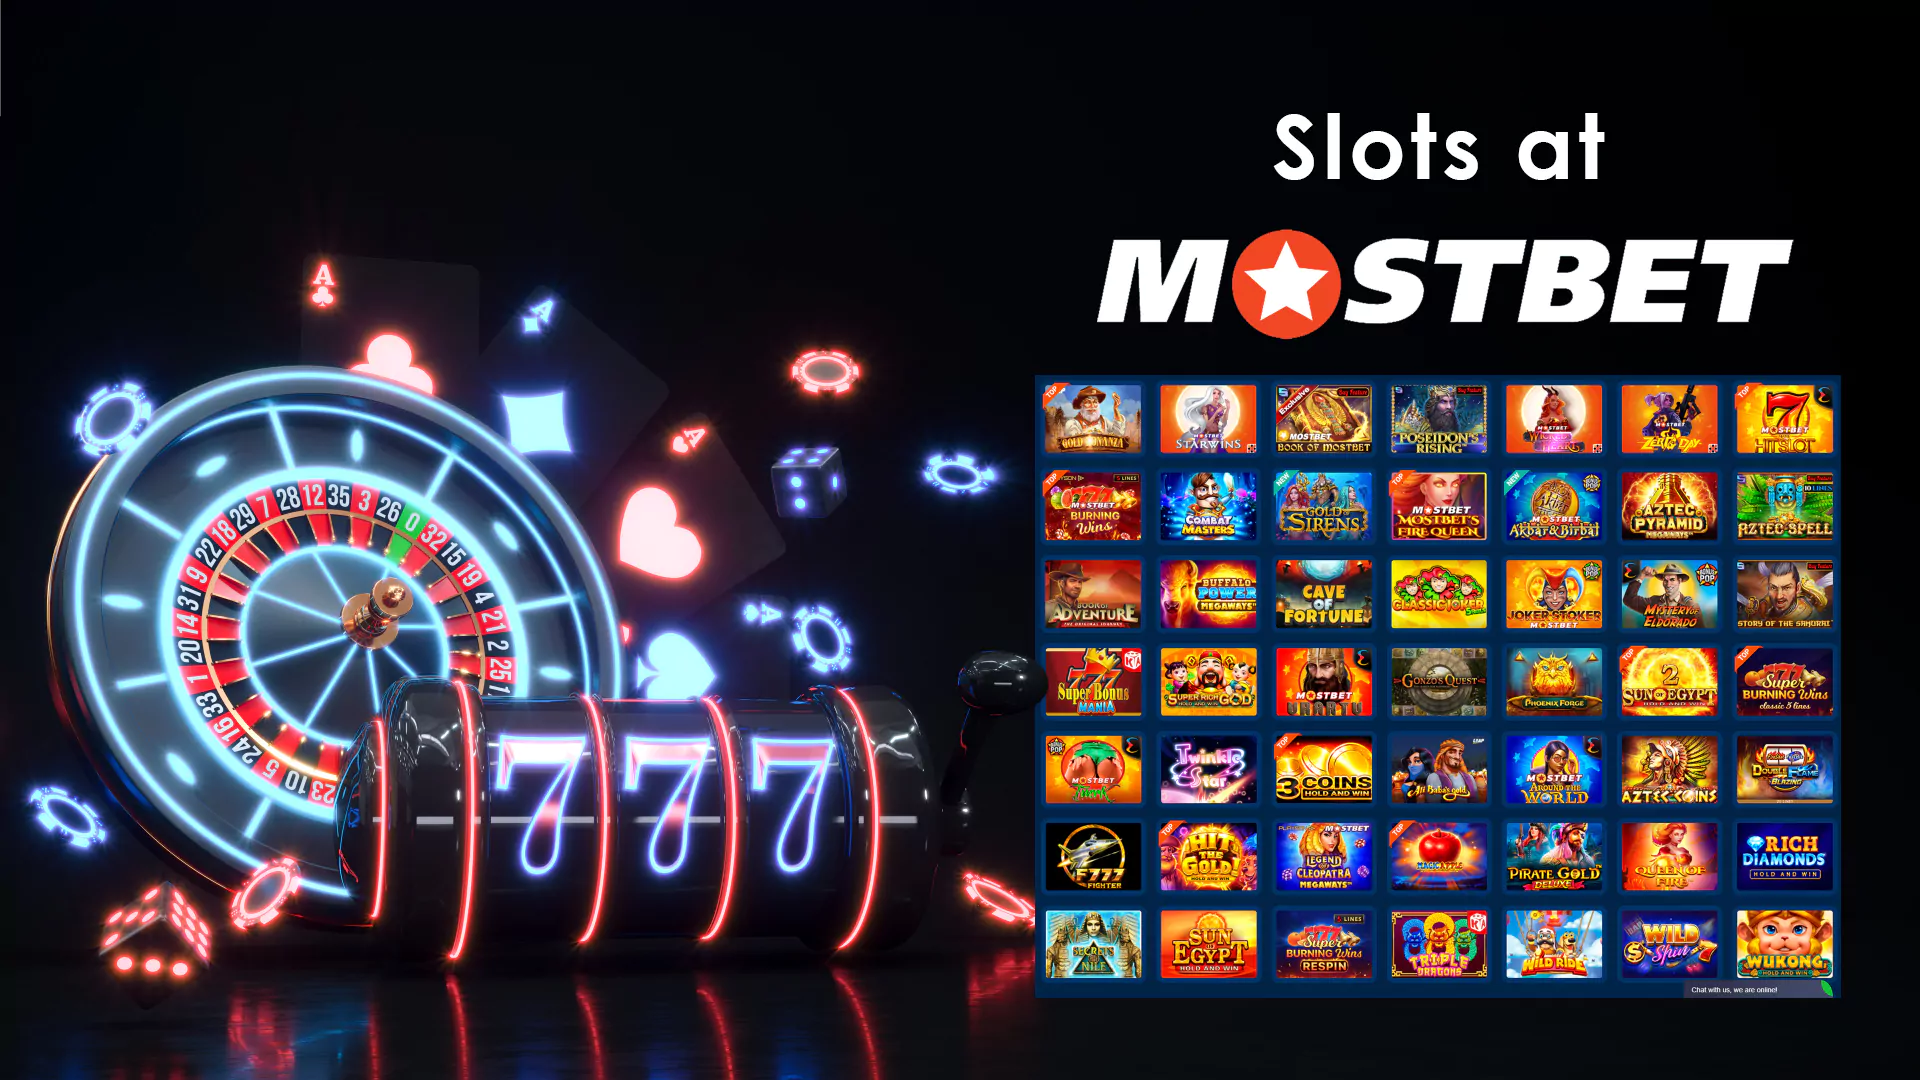 Playing slots is popular entertainment in Mostbet casino.